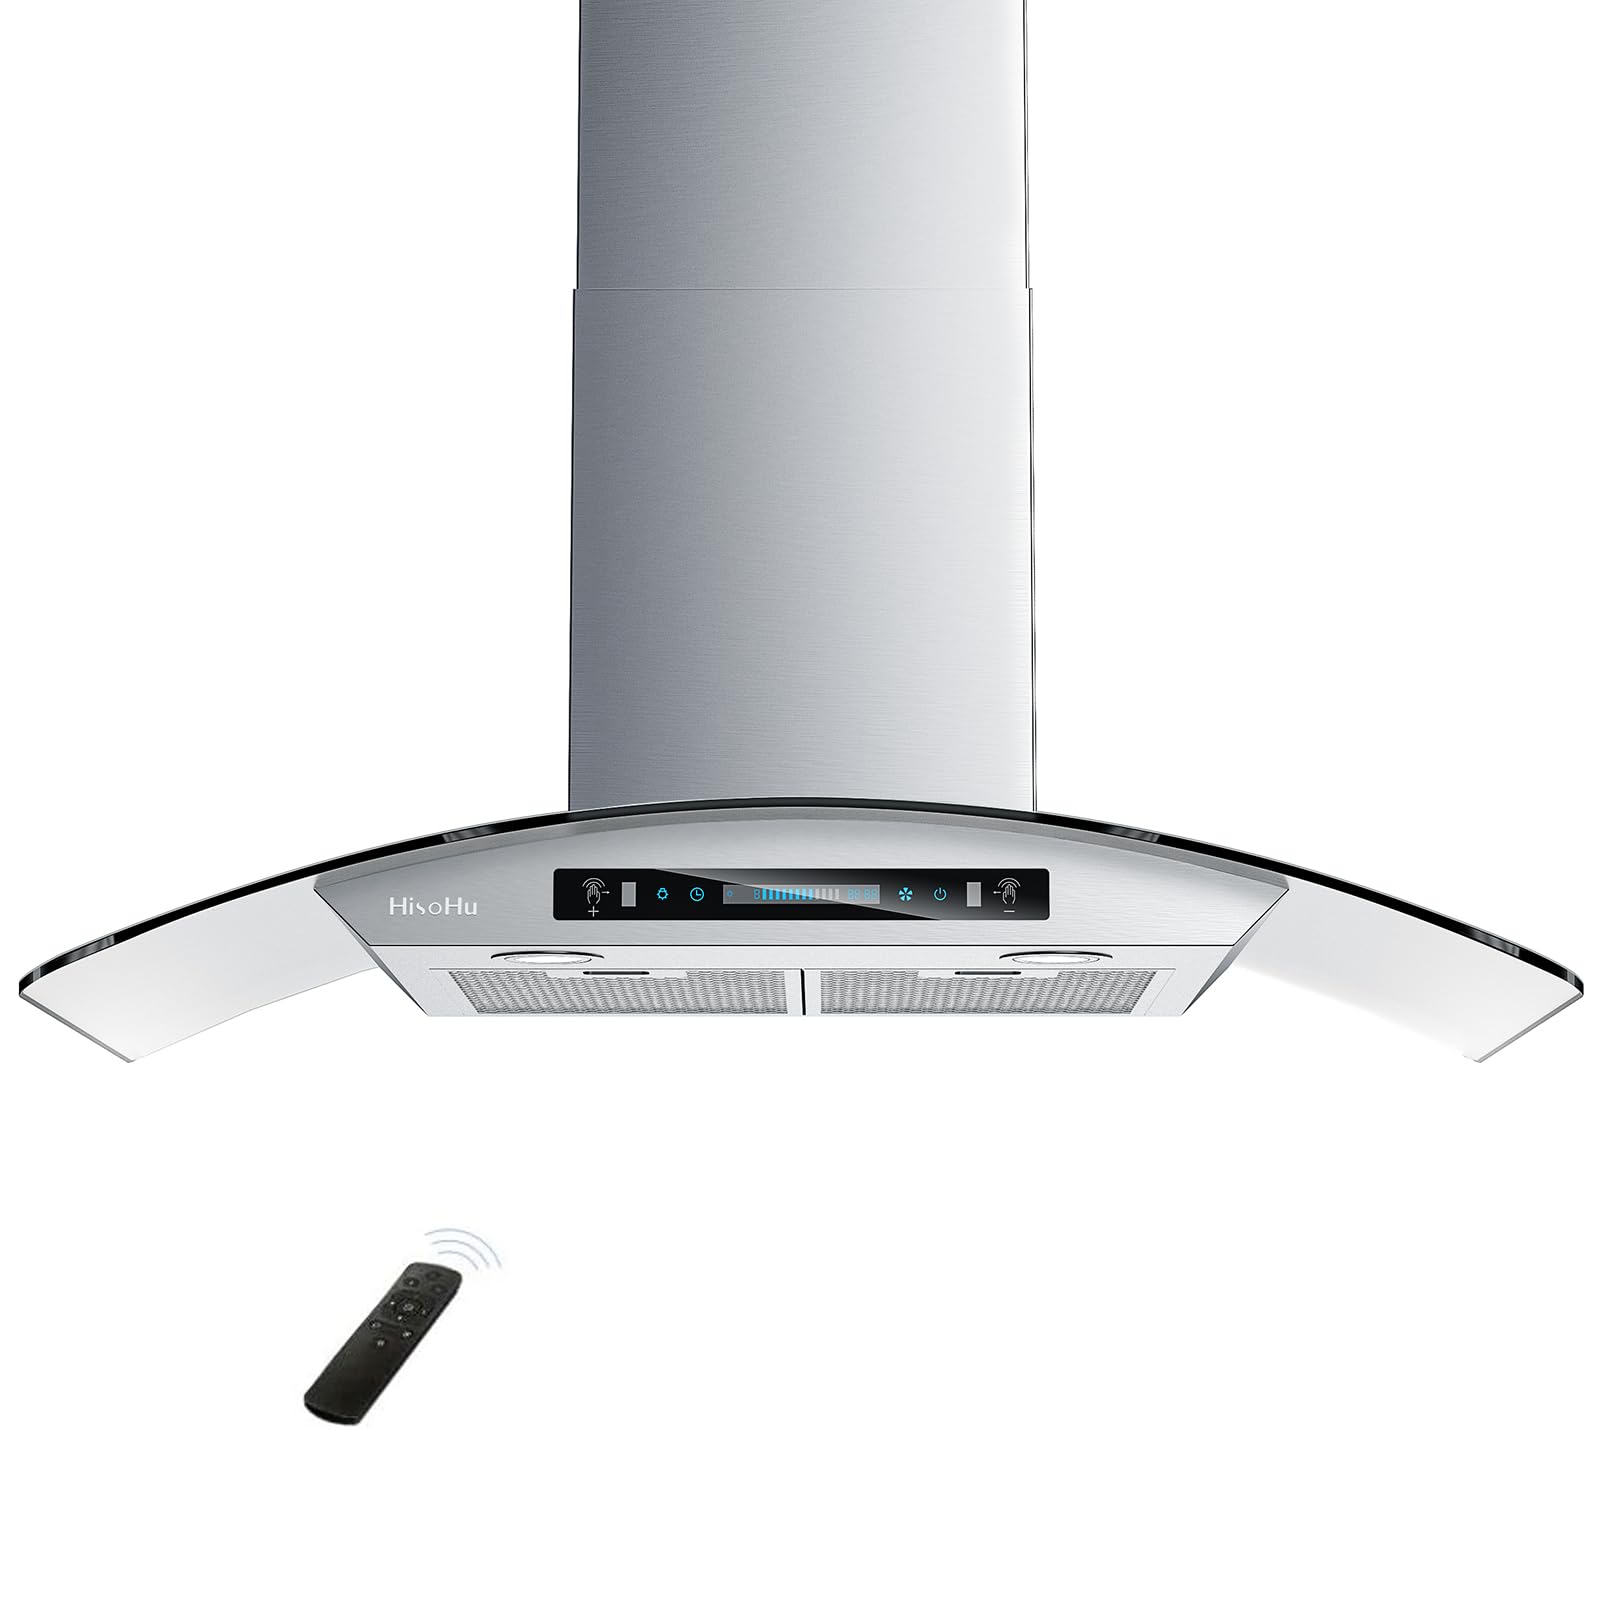 Wall Mount Curved Glass Range Hood 36 Inch, 780 CFM Kitchen Vent Hood Ductless/Ducted Convertible with Touchscreen and LED Lights, Stainless Steel